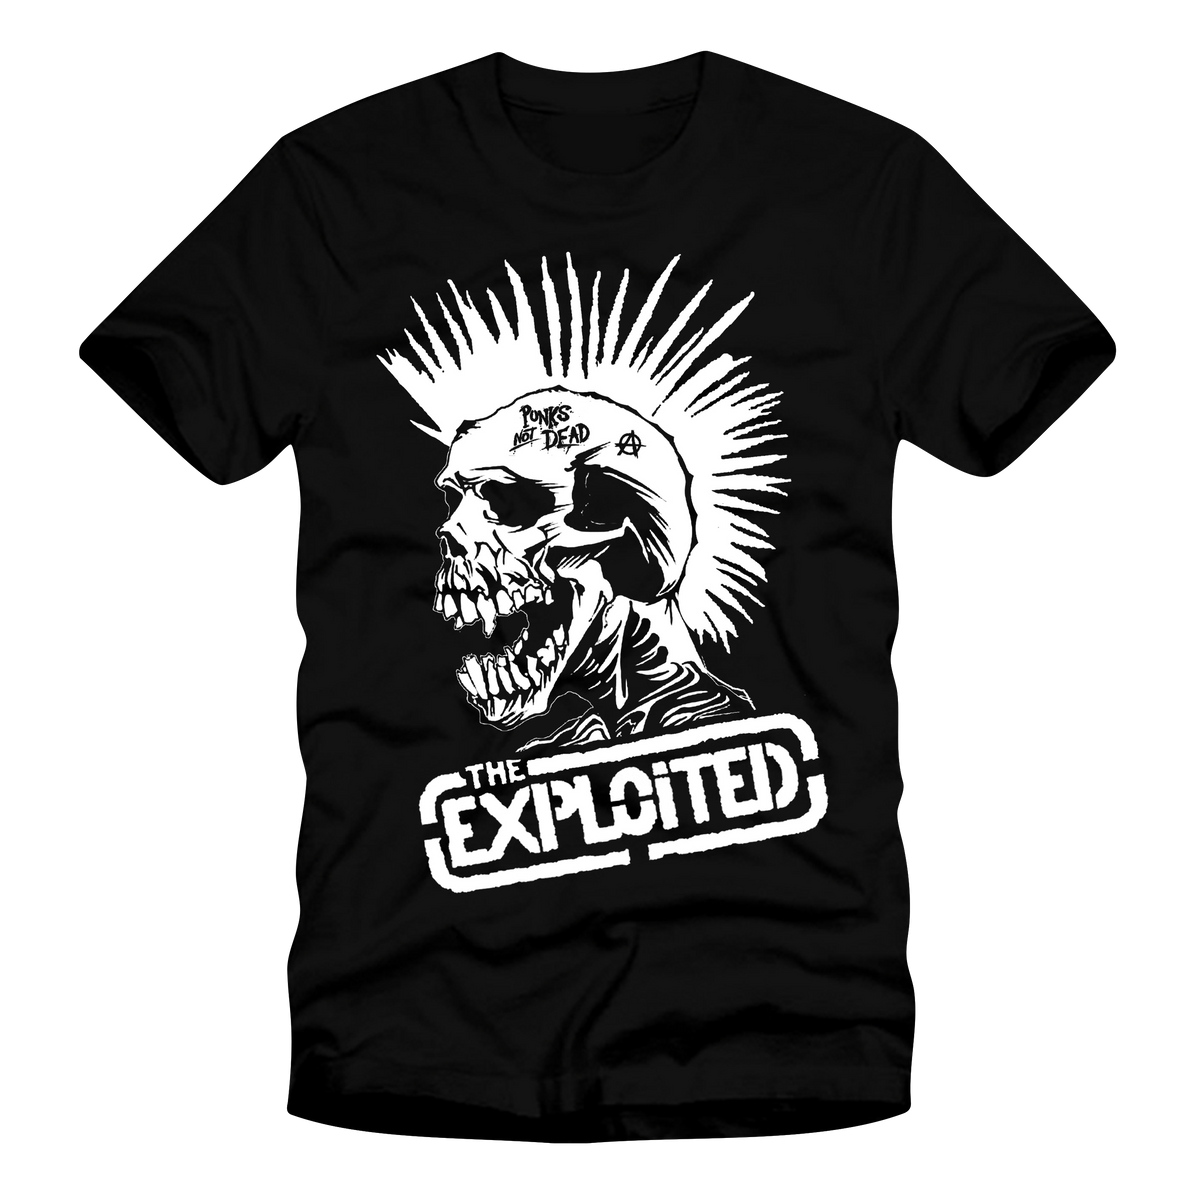 The Exploited - Punk's Not Dead T Shirt – Enemy Ink